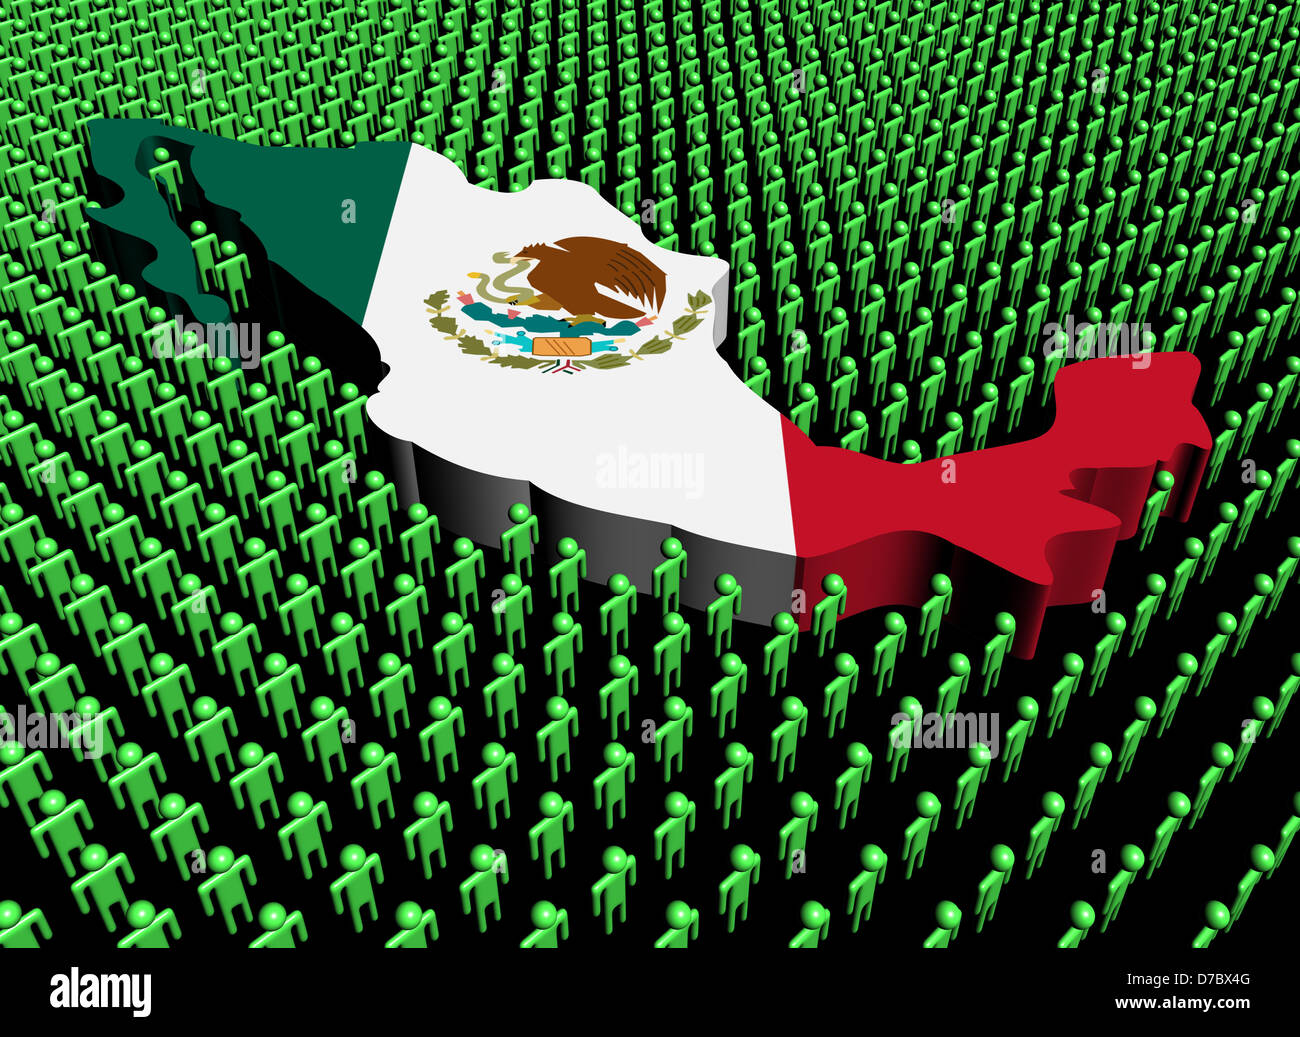 Mexico map flag surrounded by many abstract people illustration Stock Photo